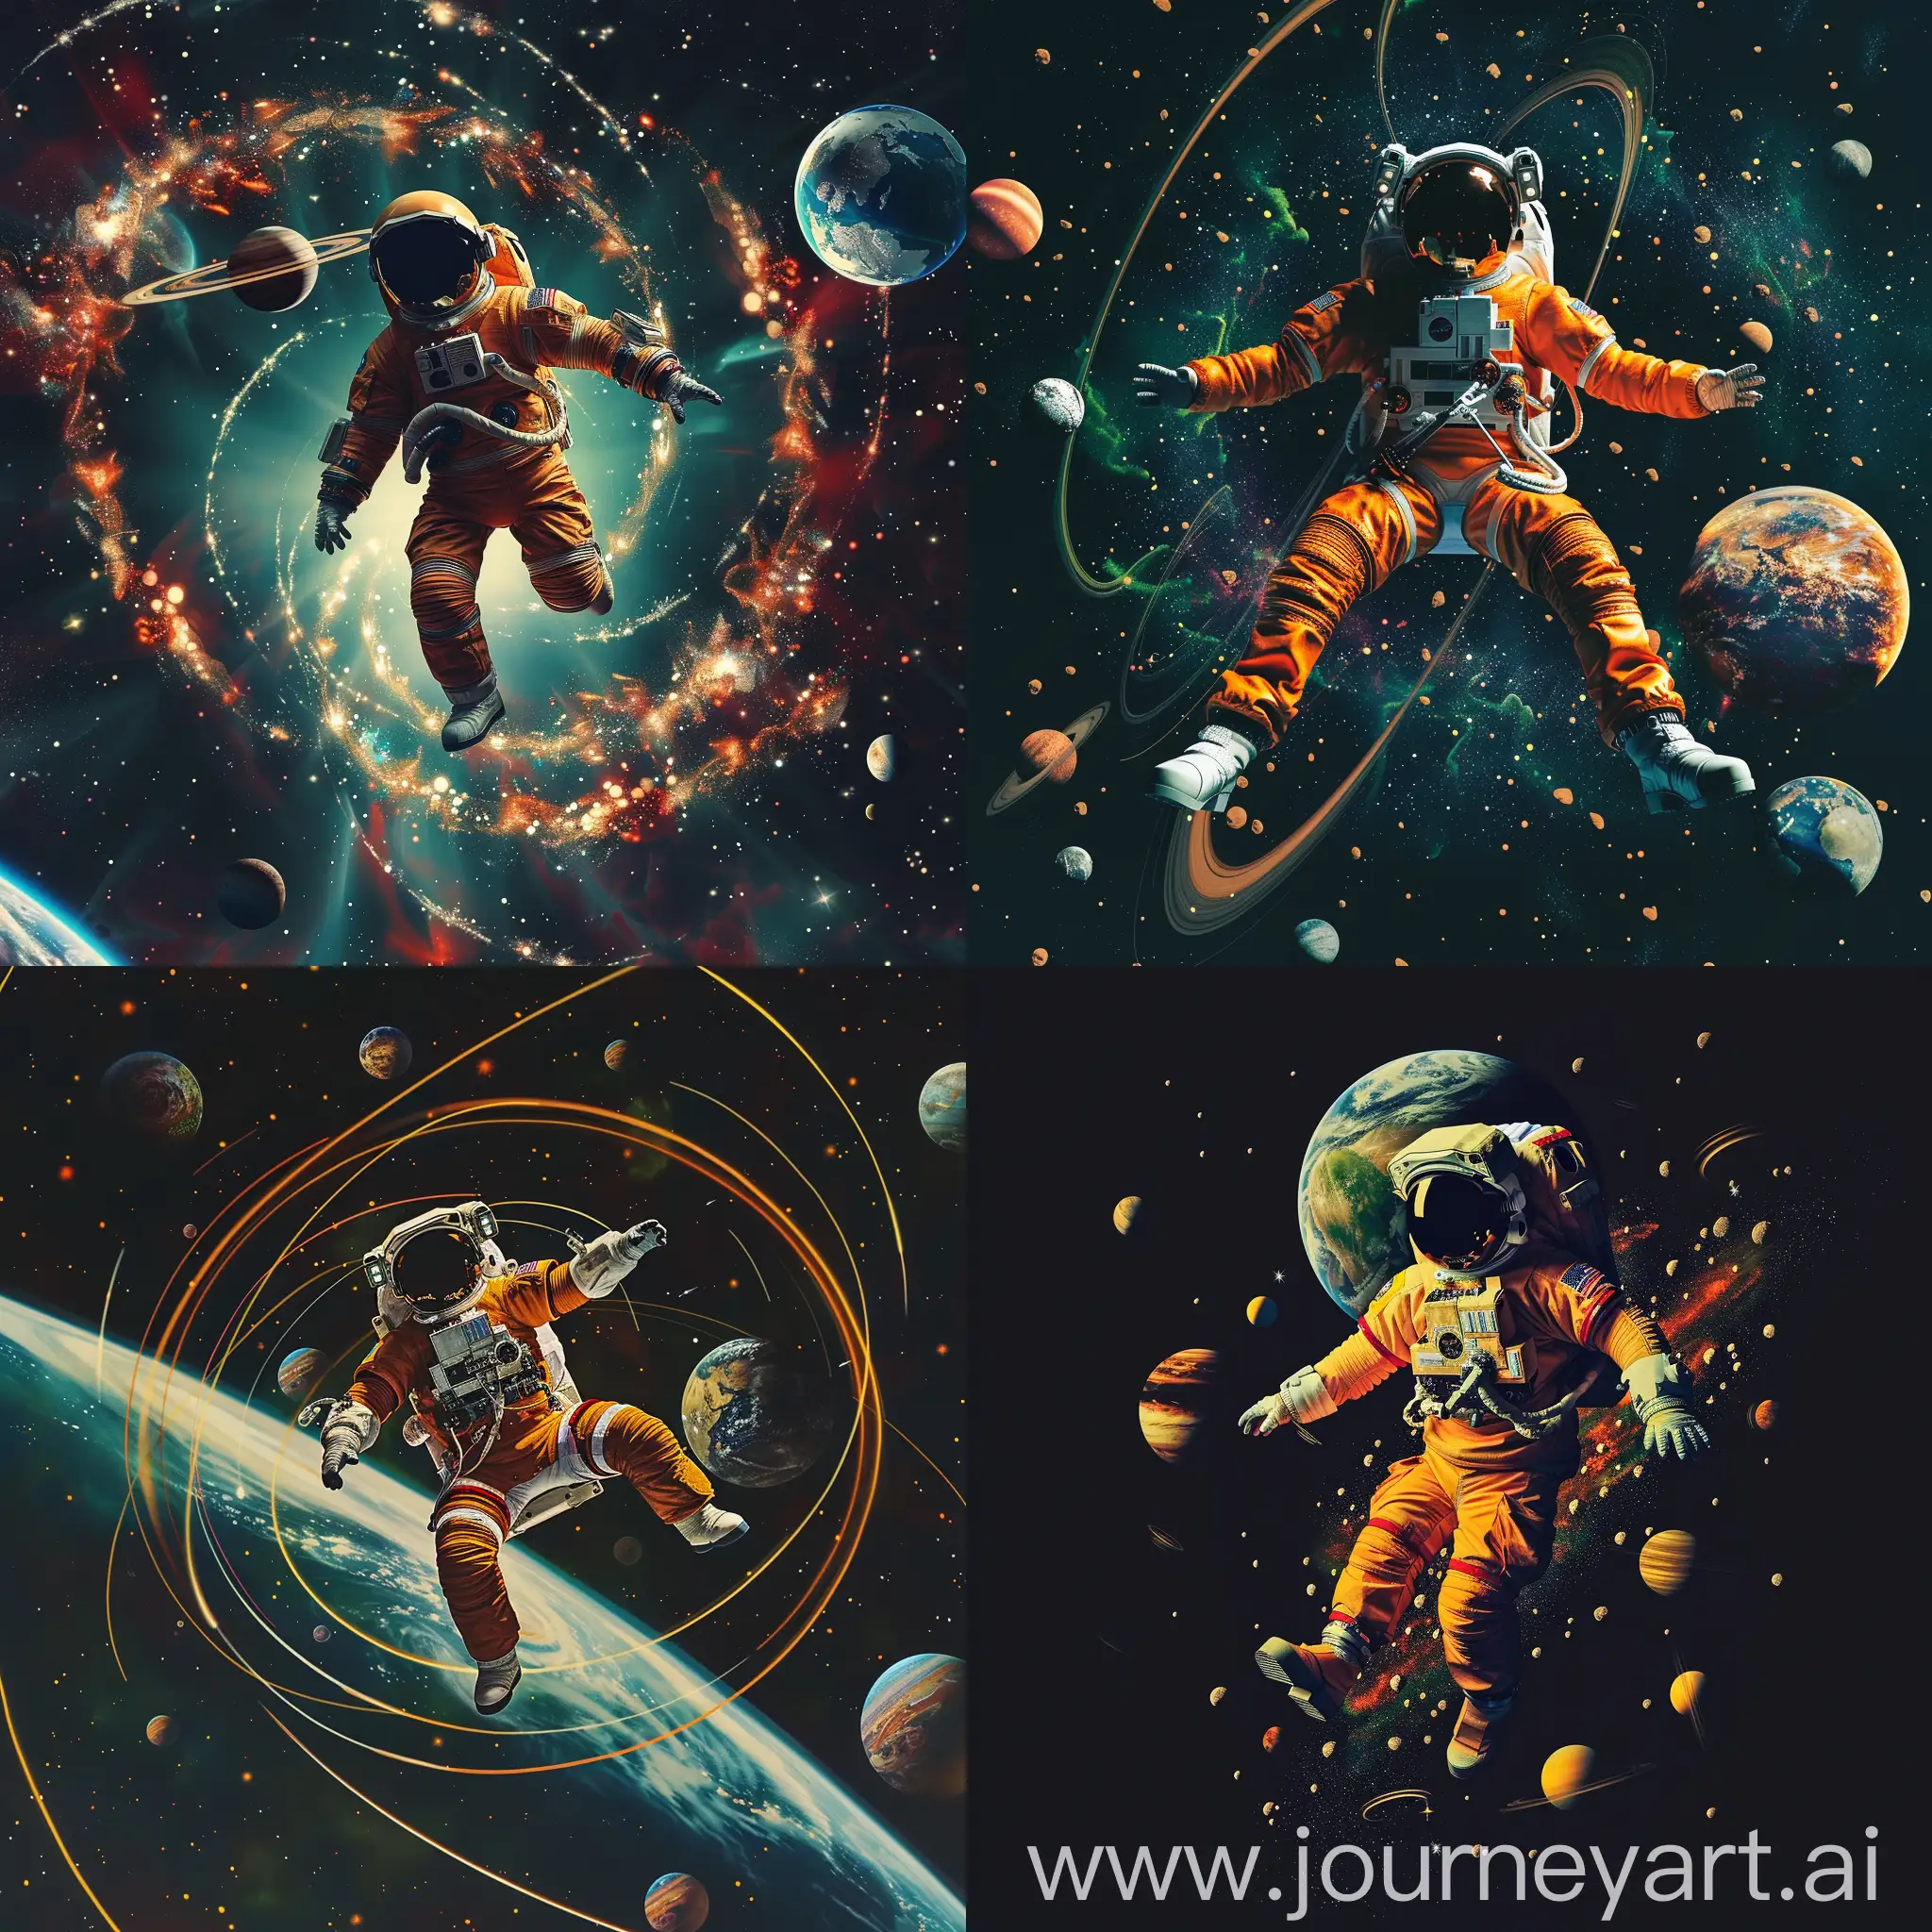 Exploration-Beyond-Earth-Astronaut-Soaring-Amidst-Orbits-and-Planets